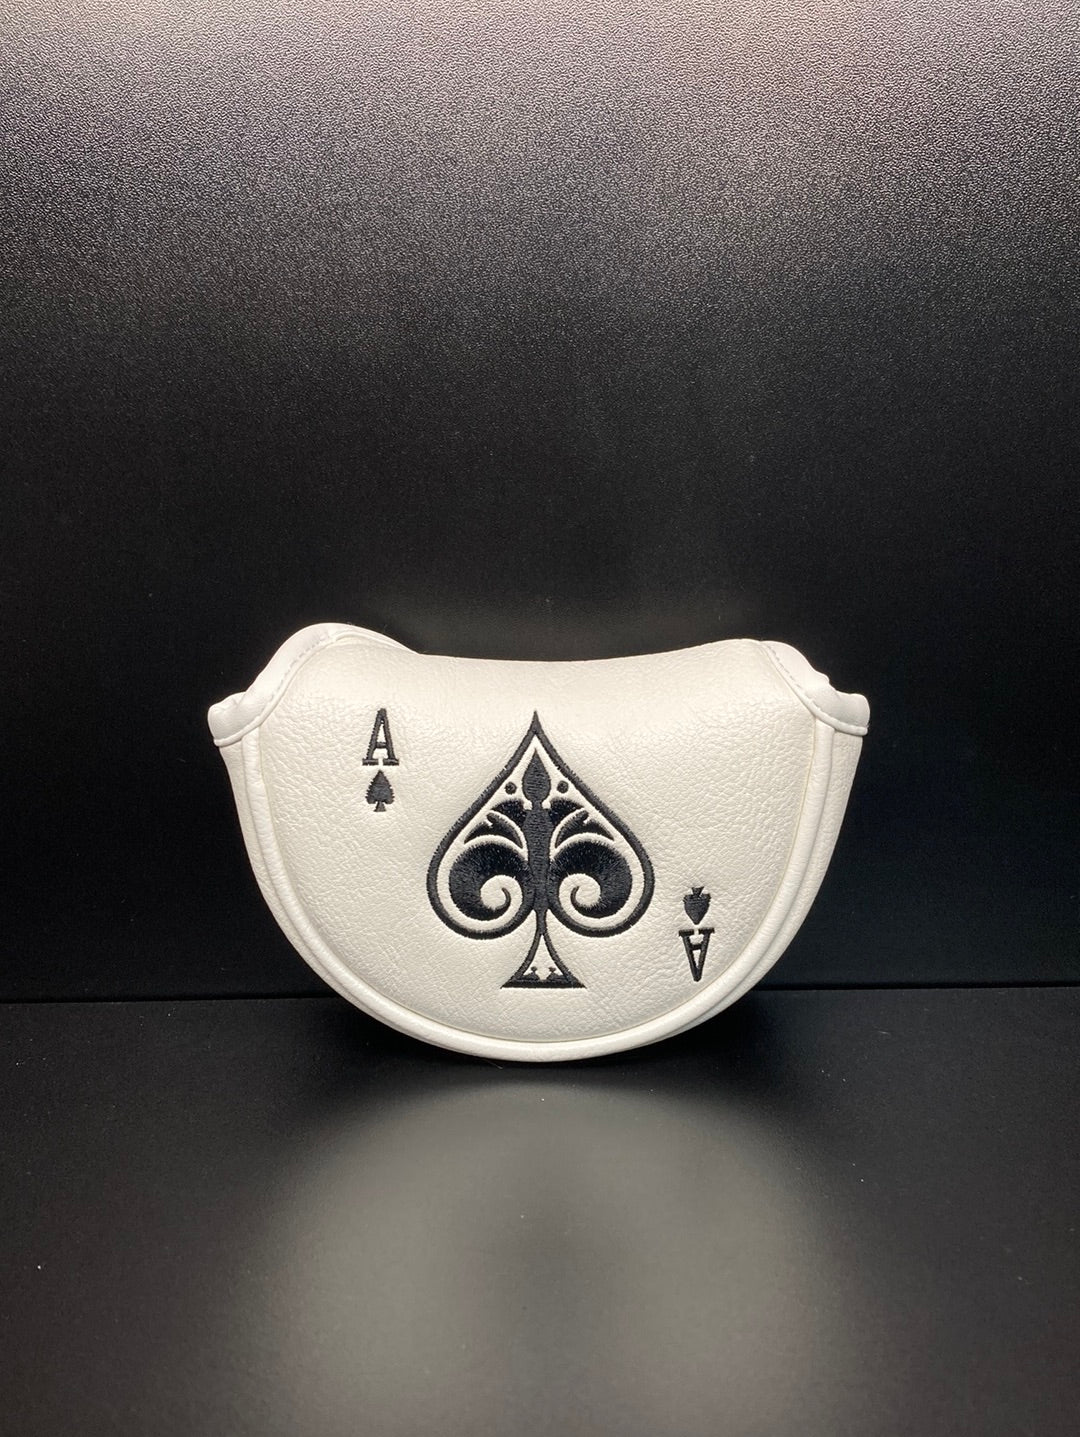 Ace of Spades Headcovers